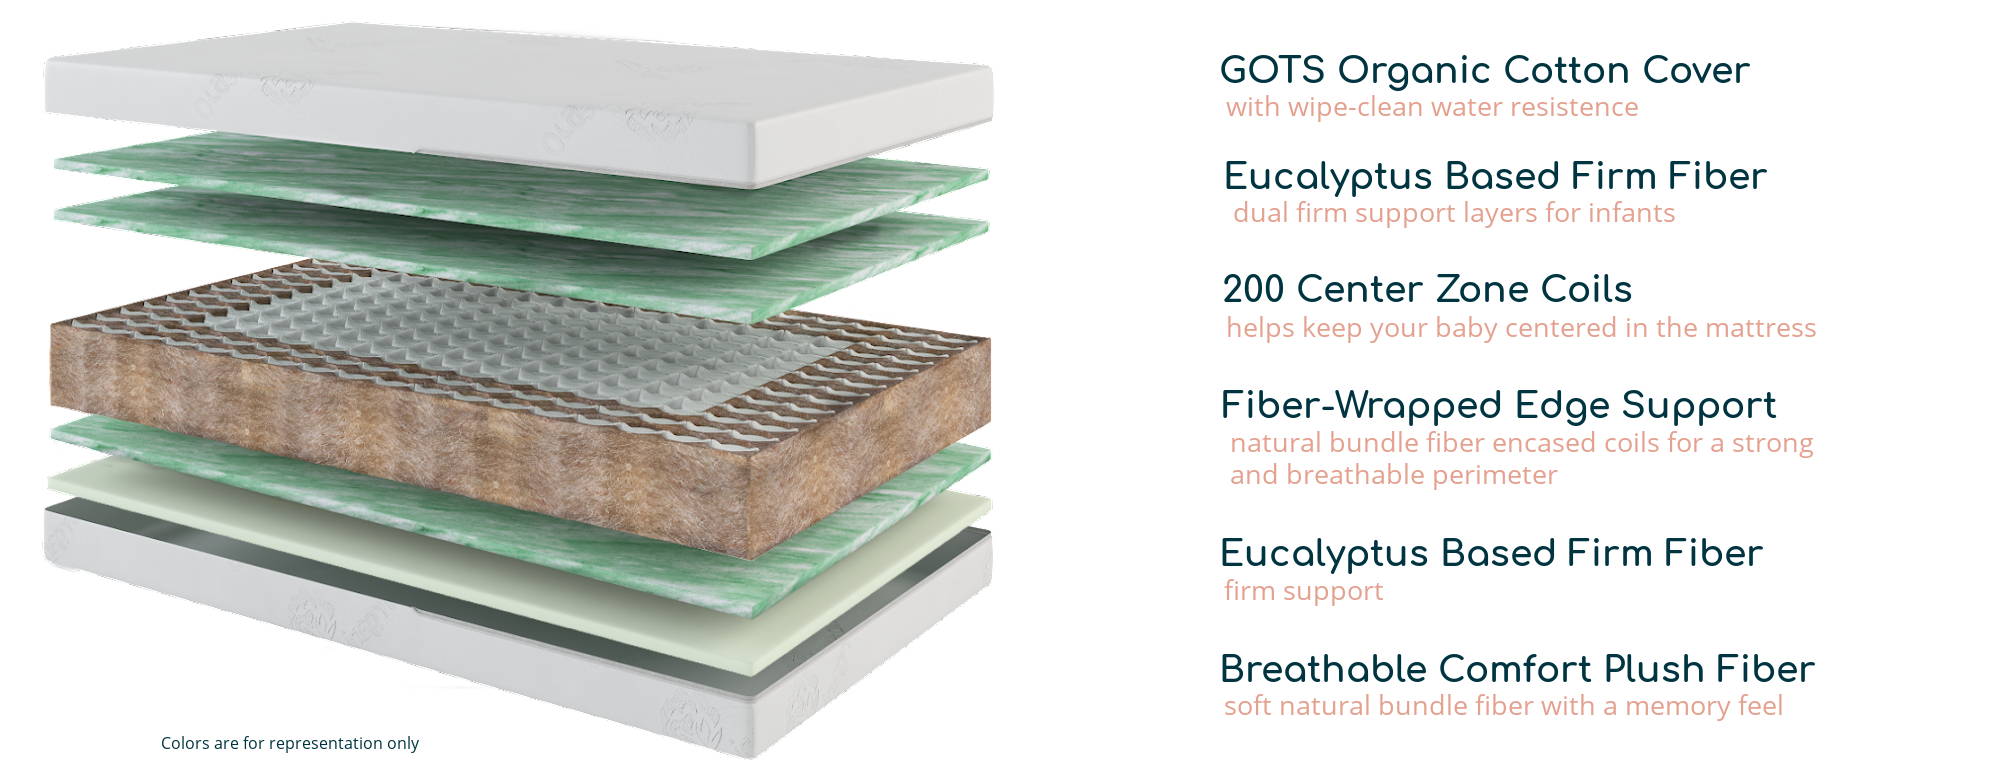 GOTS Organic Cotton Cover-with wipe clean resistance, Eucalyptus Based Firm Fiber 200 Center Zone Coils, Fiber Wrapped Edge Support, Eucalyptus Based Firm Fiber, and Breathable Comfort Plush Fiber.